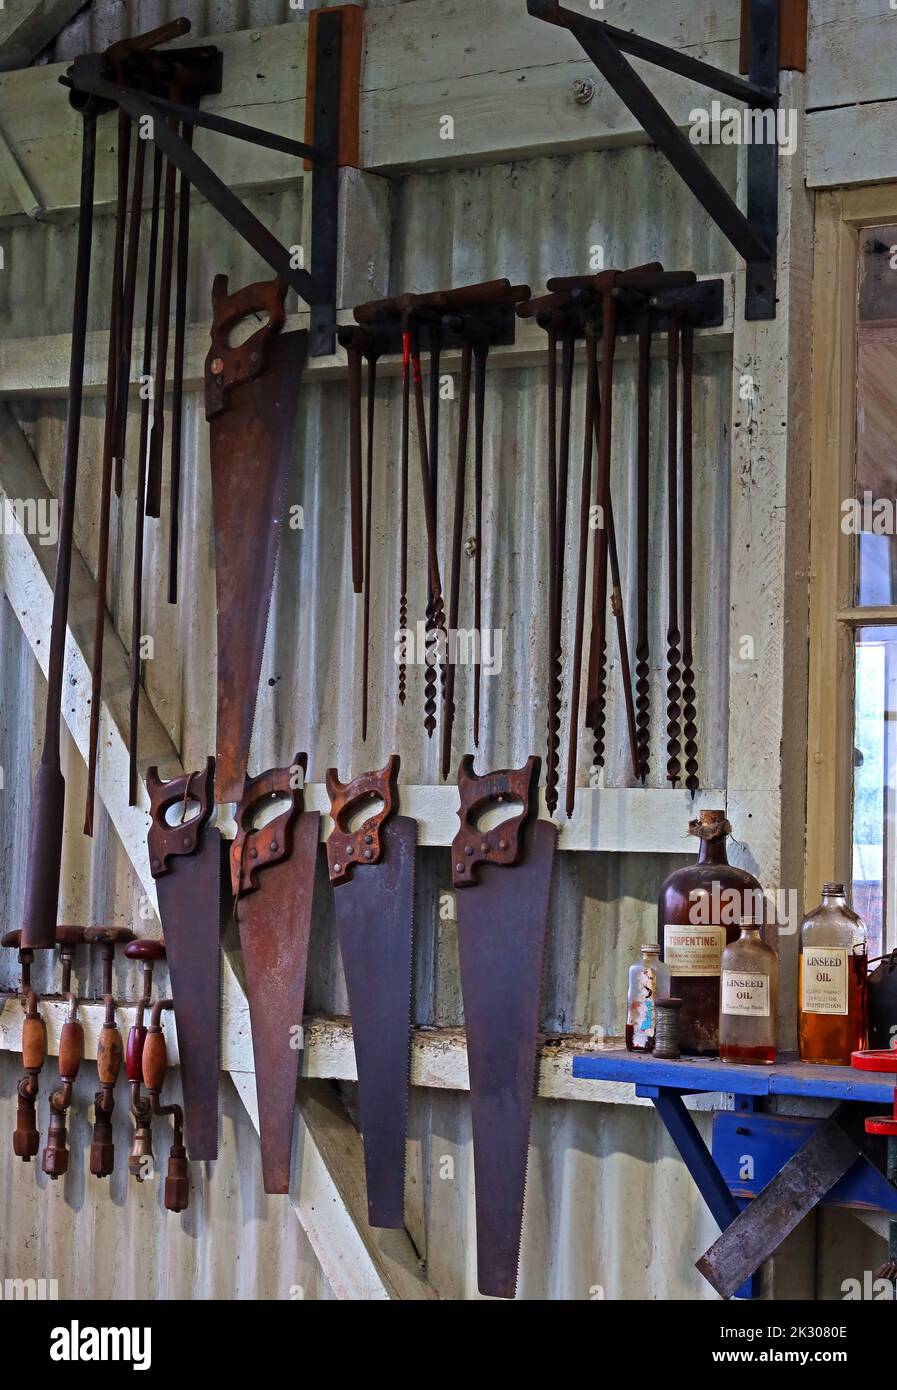 Tools stored in a toolshed neatly, saws, Stock Photo